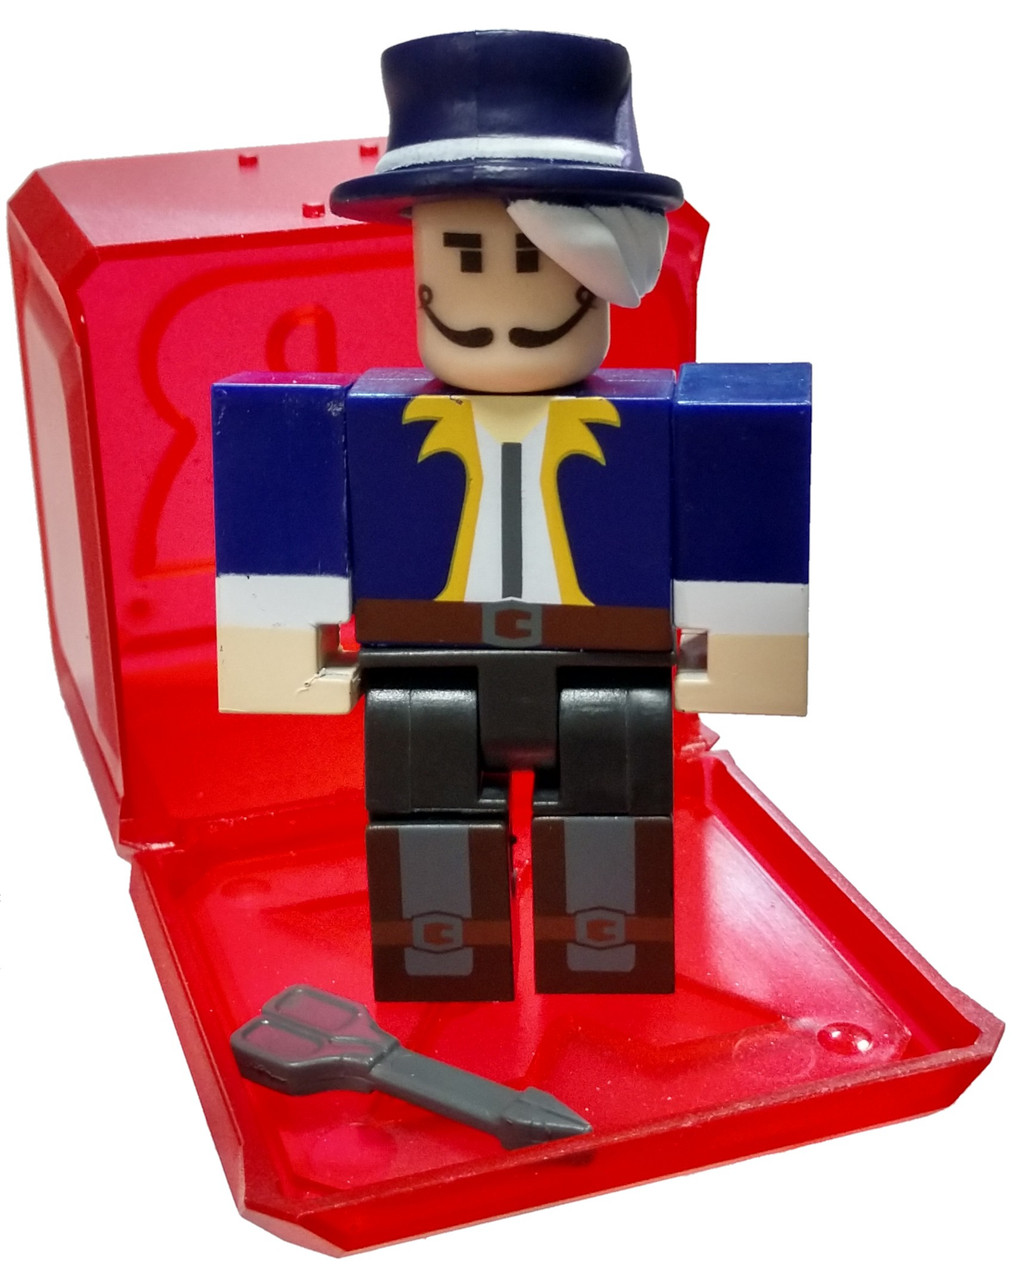 Roblox Celebrity Collection Series 5 Vesteria Barber S 3 Mini Figure With Red Cube And Online Code Loose Jazwares Toywiz - monkey haircut roblox